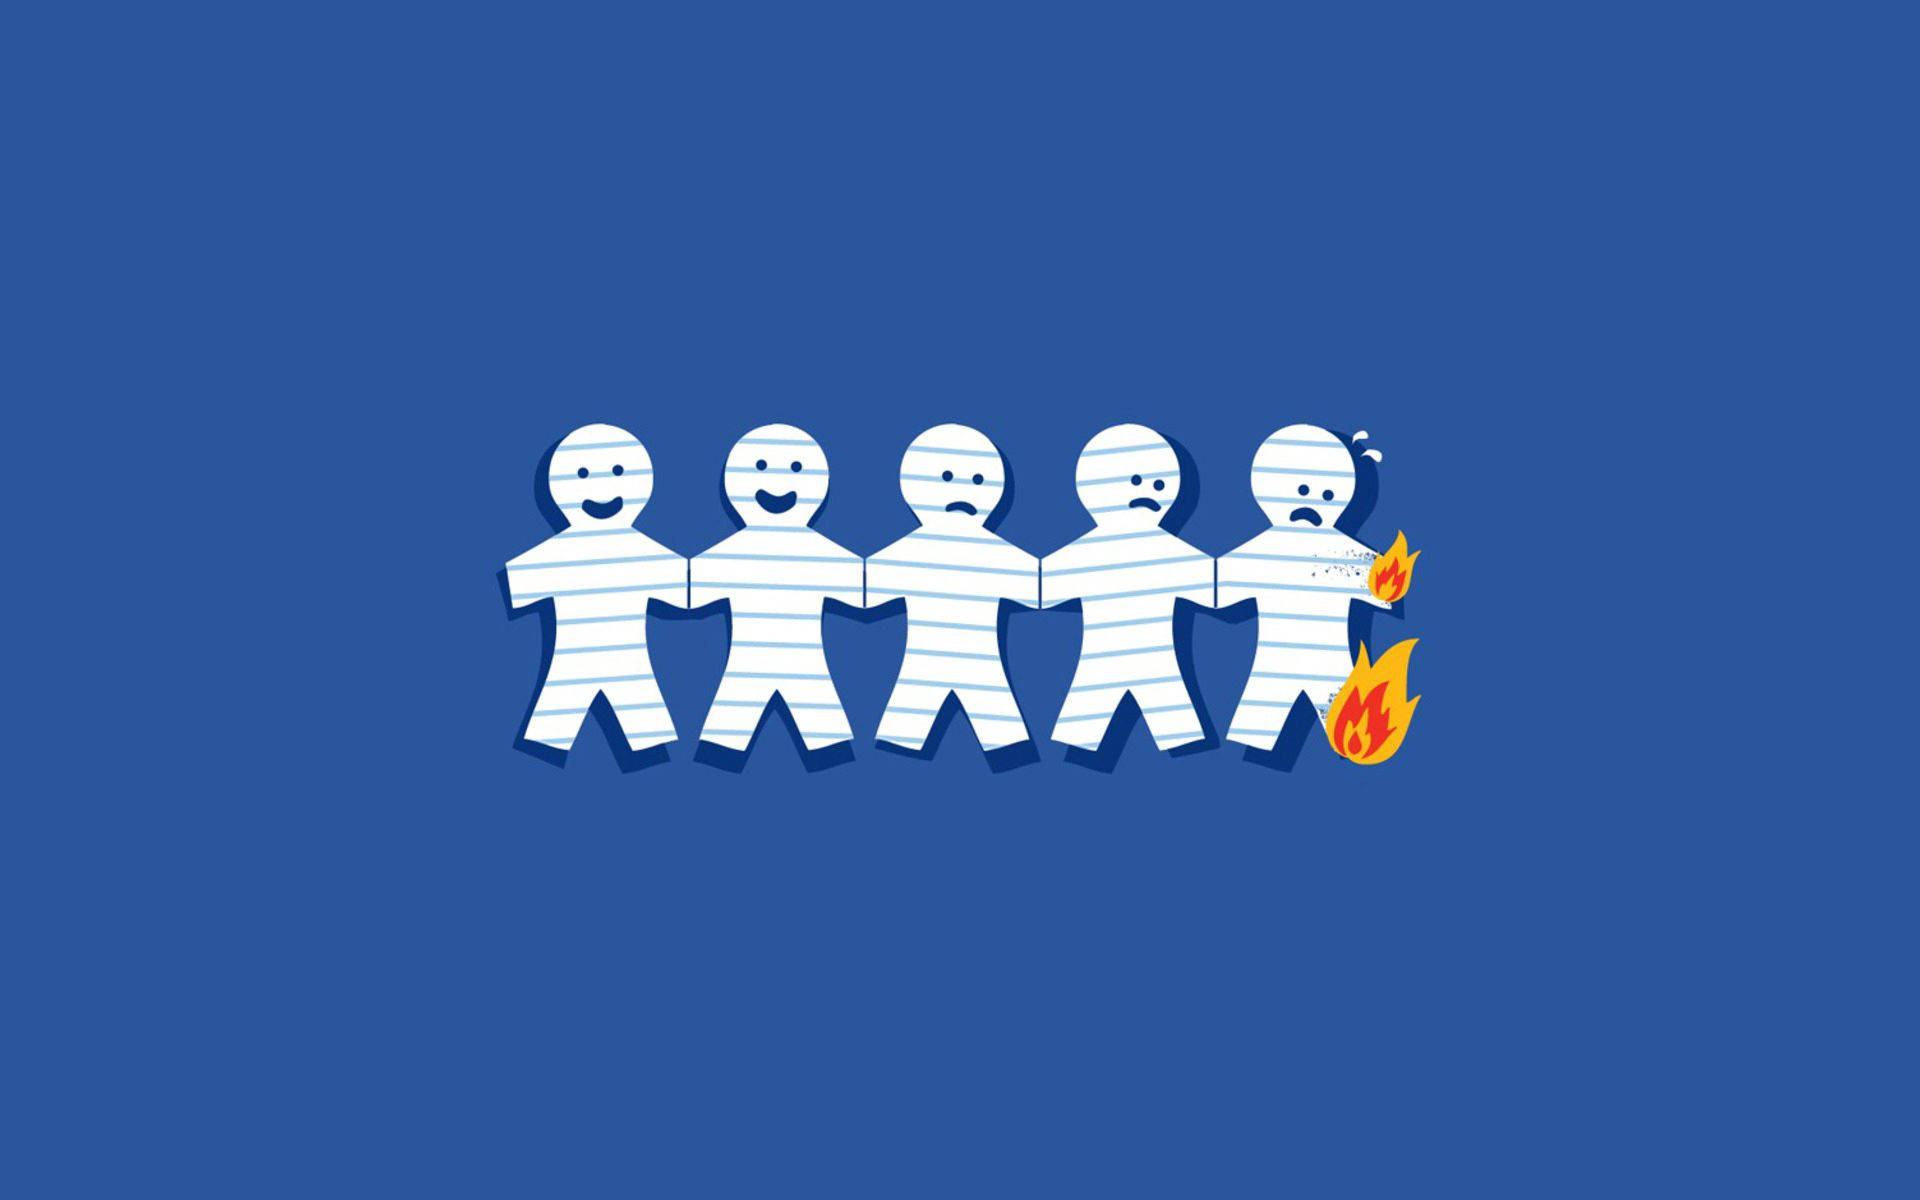 Paper Friends On Fire Background